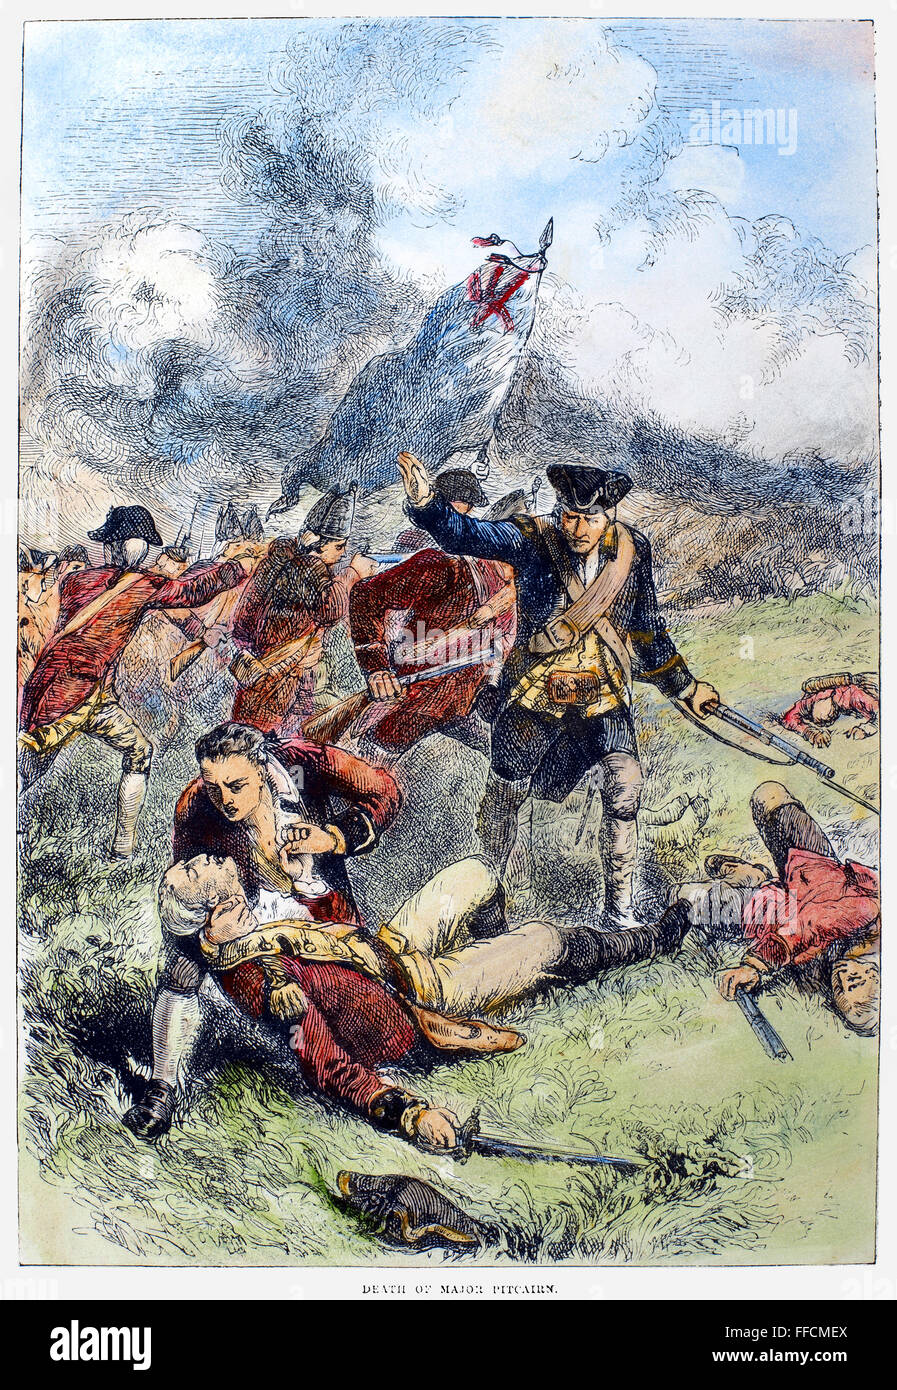 BATTLE OF BUNKER HILL, 1775. /nThe death of Major John Pitcairn of the British Royal Marines at the Battle of Bunker Hill during the American Revolutionary War, 17 June 1775. Wood engraving, English, 19th century. Stock Photo